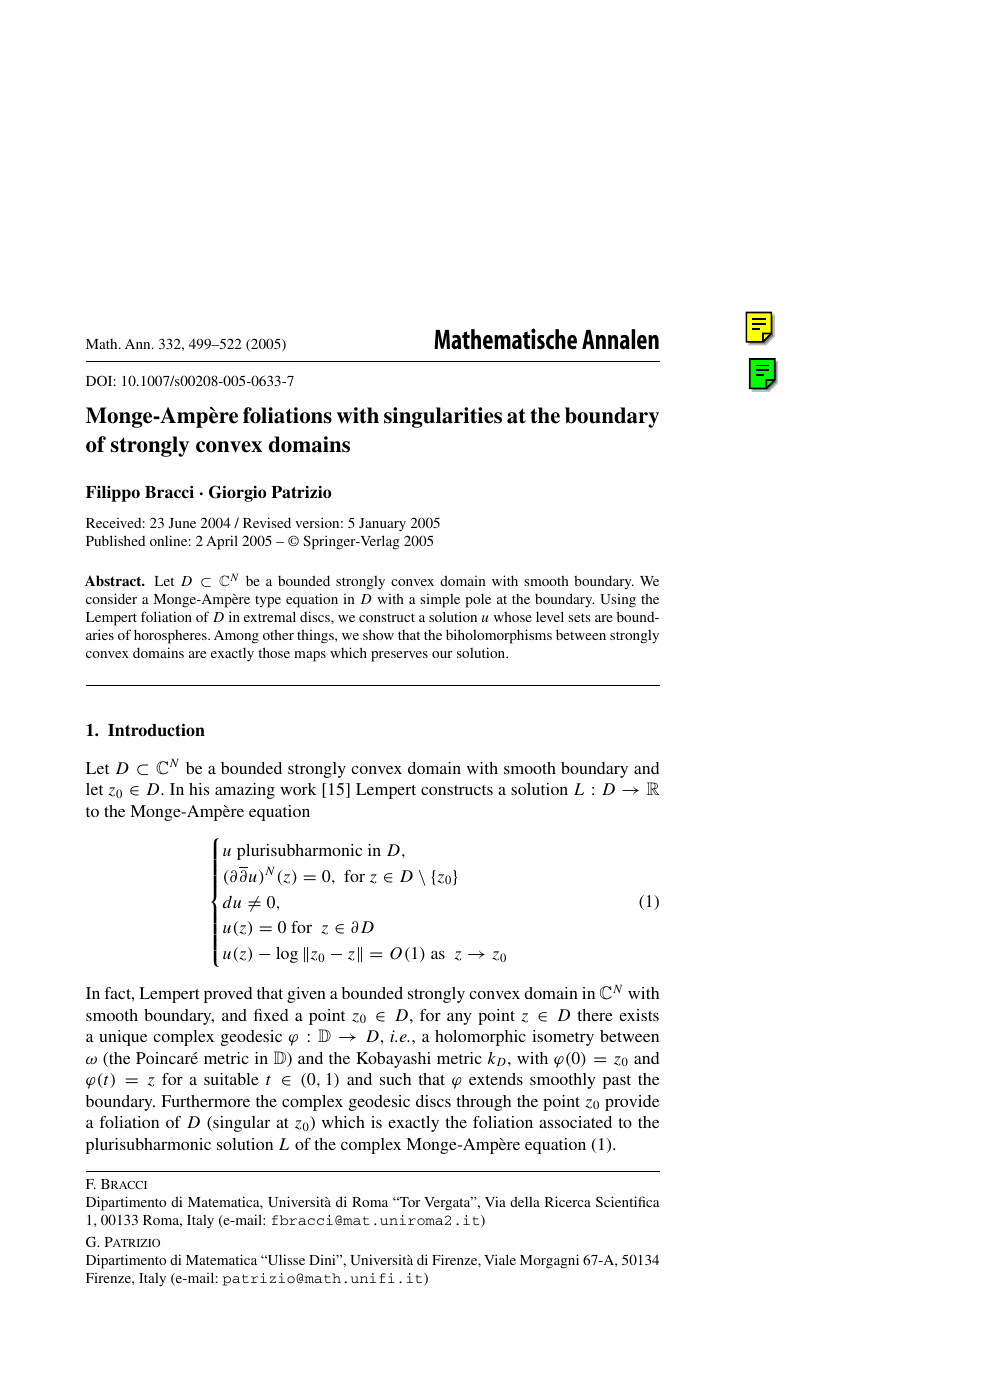 Monge Ampere Foliations With Singularities At The Boundary Of Strongly Convex Domains Topic Of Research Paper In Mathematics Download Scholarly Article Pdf And Read For Free On Cyberleninka Open Science Hub